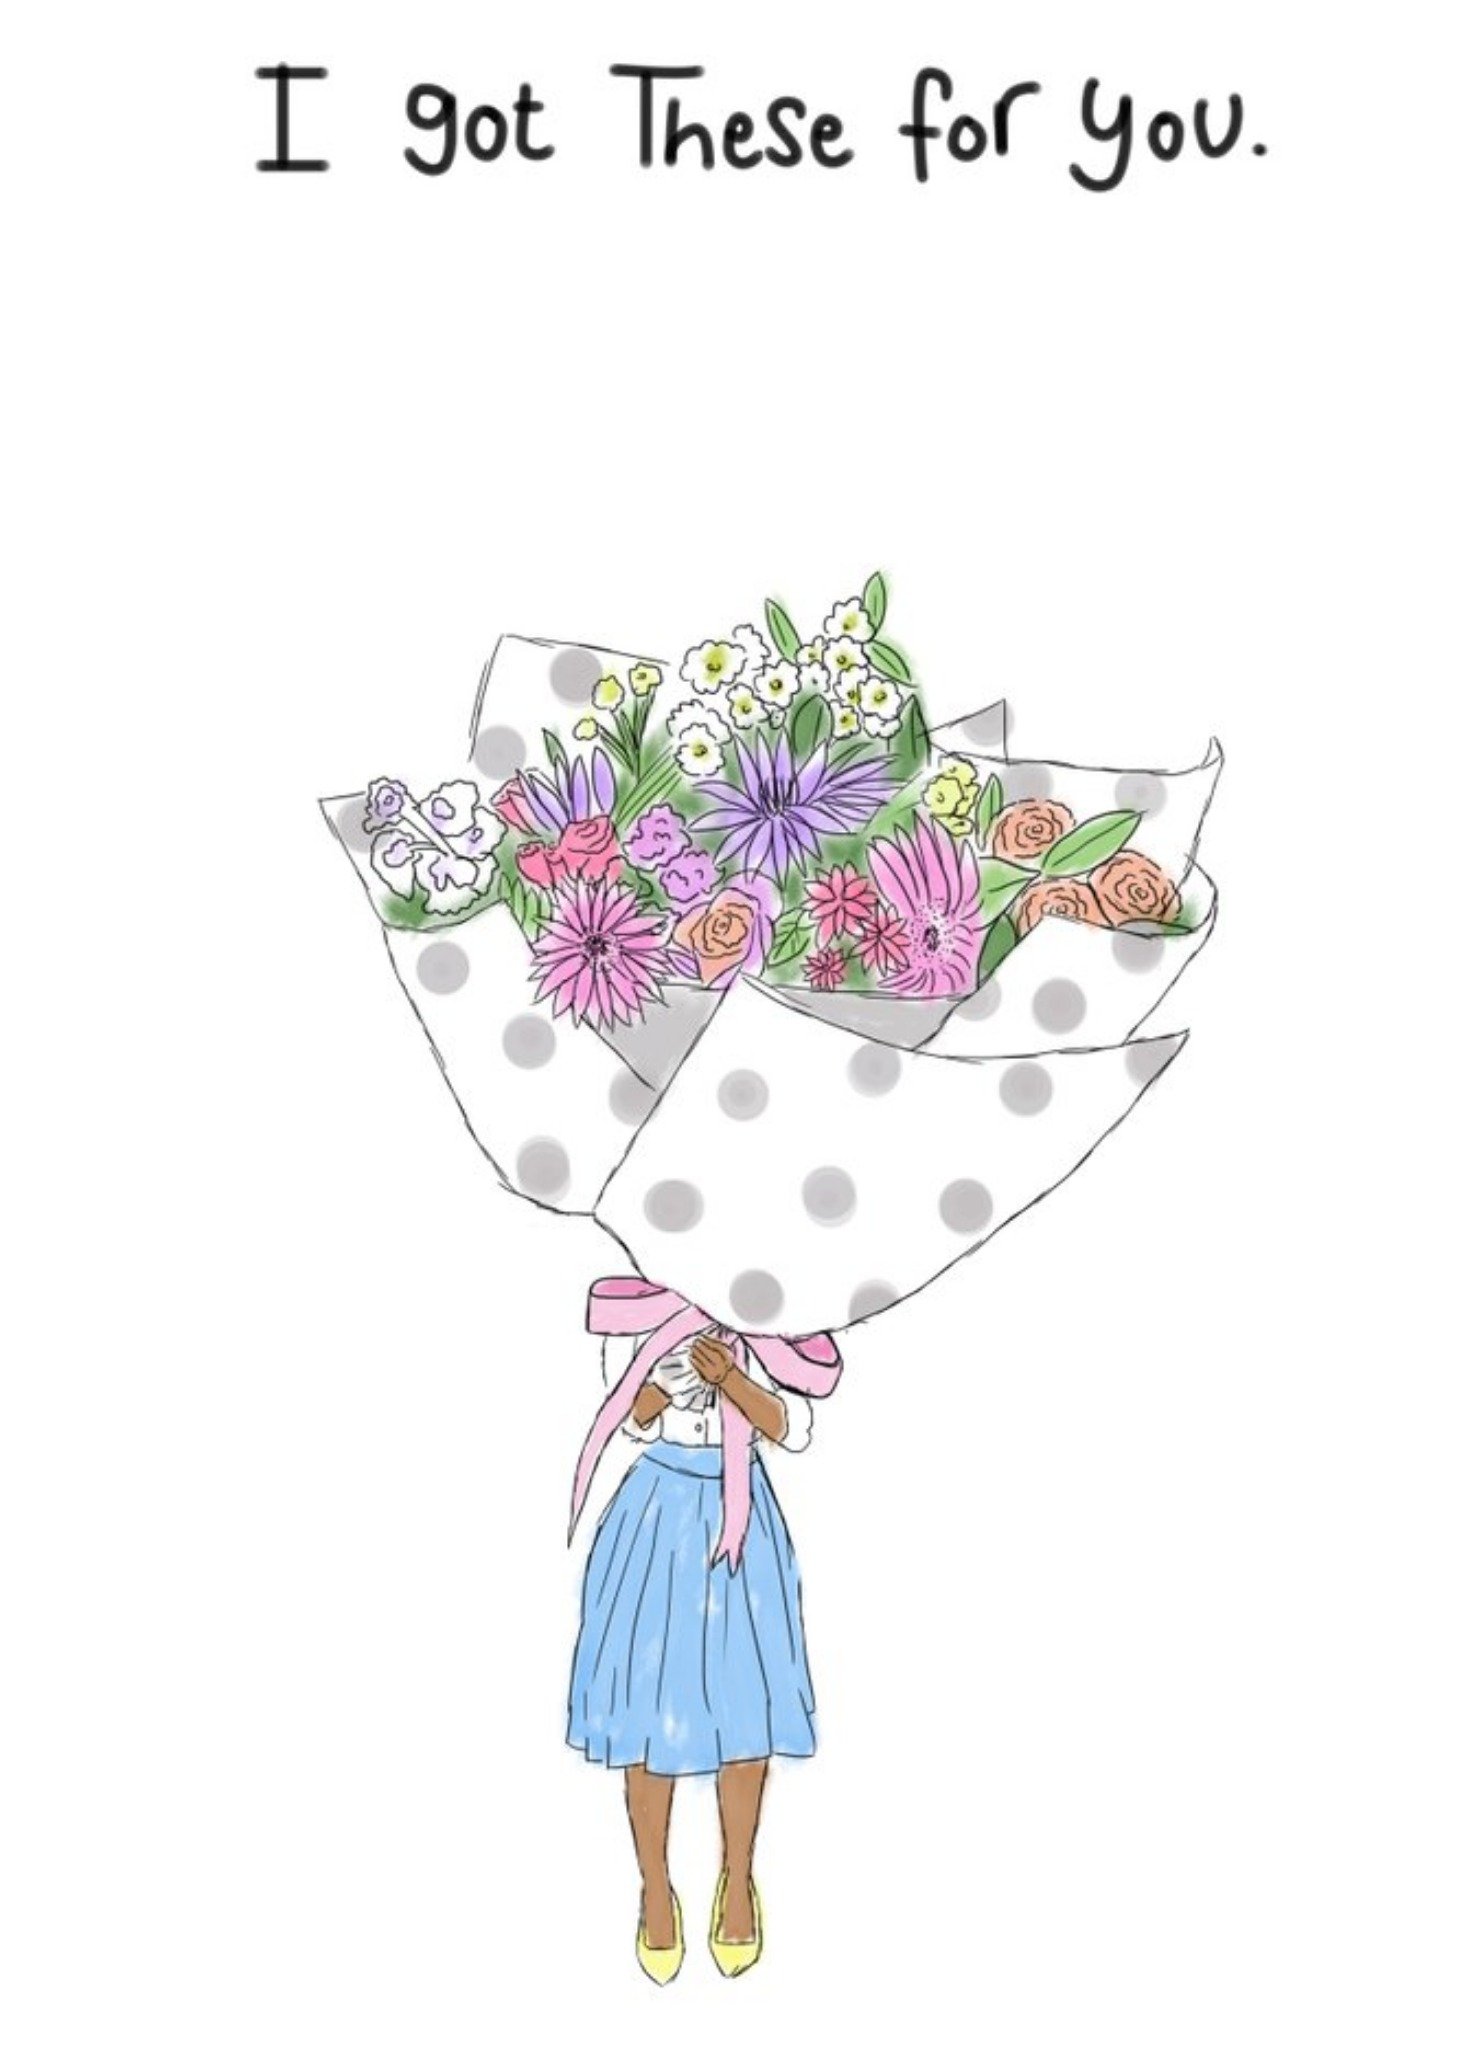 Moonpig Illustration Of A Woman With A Large Bouquet Of Flowers Thinking Of You Card